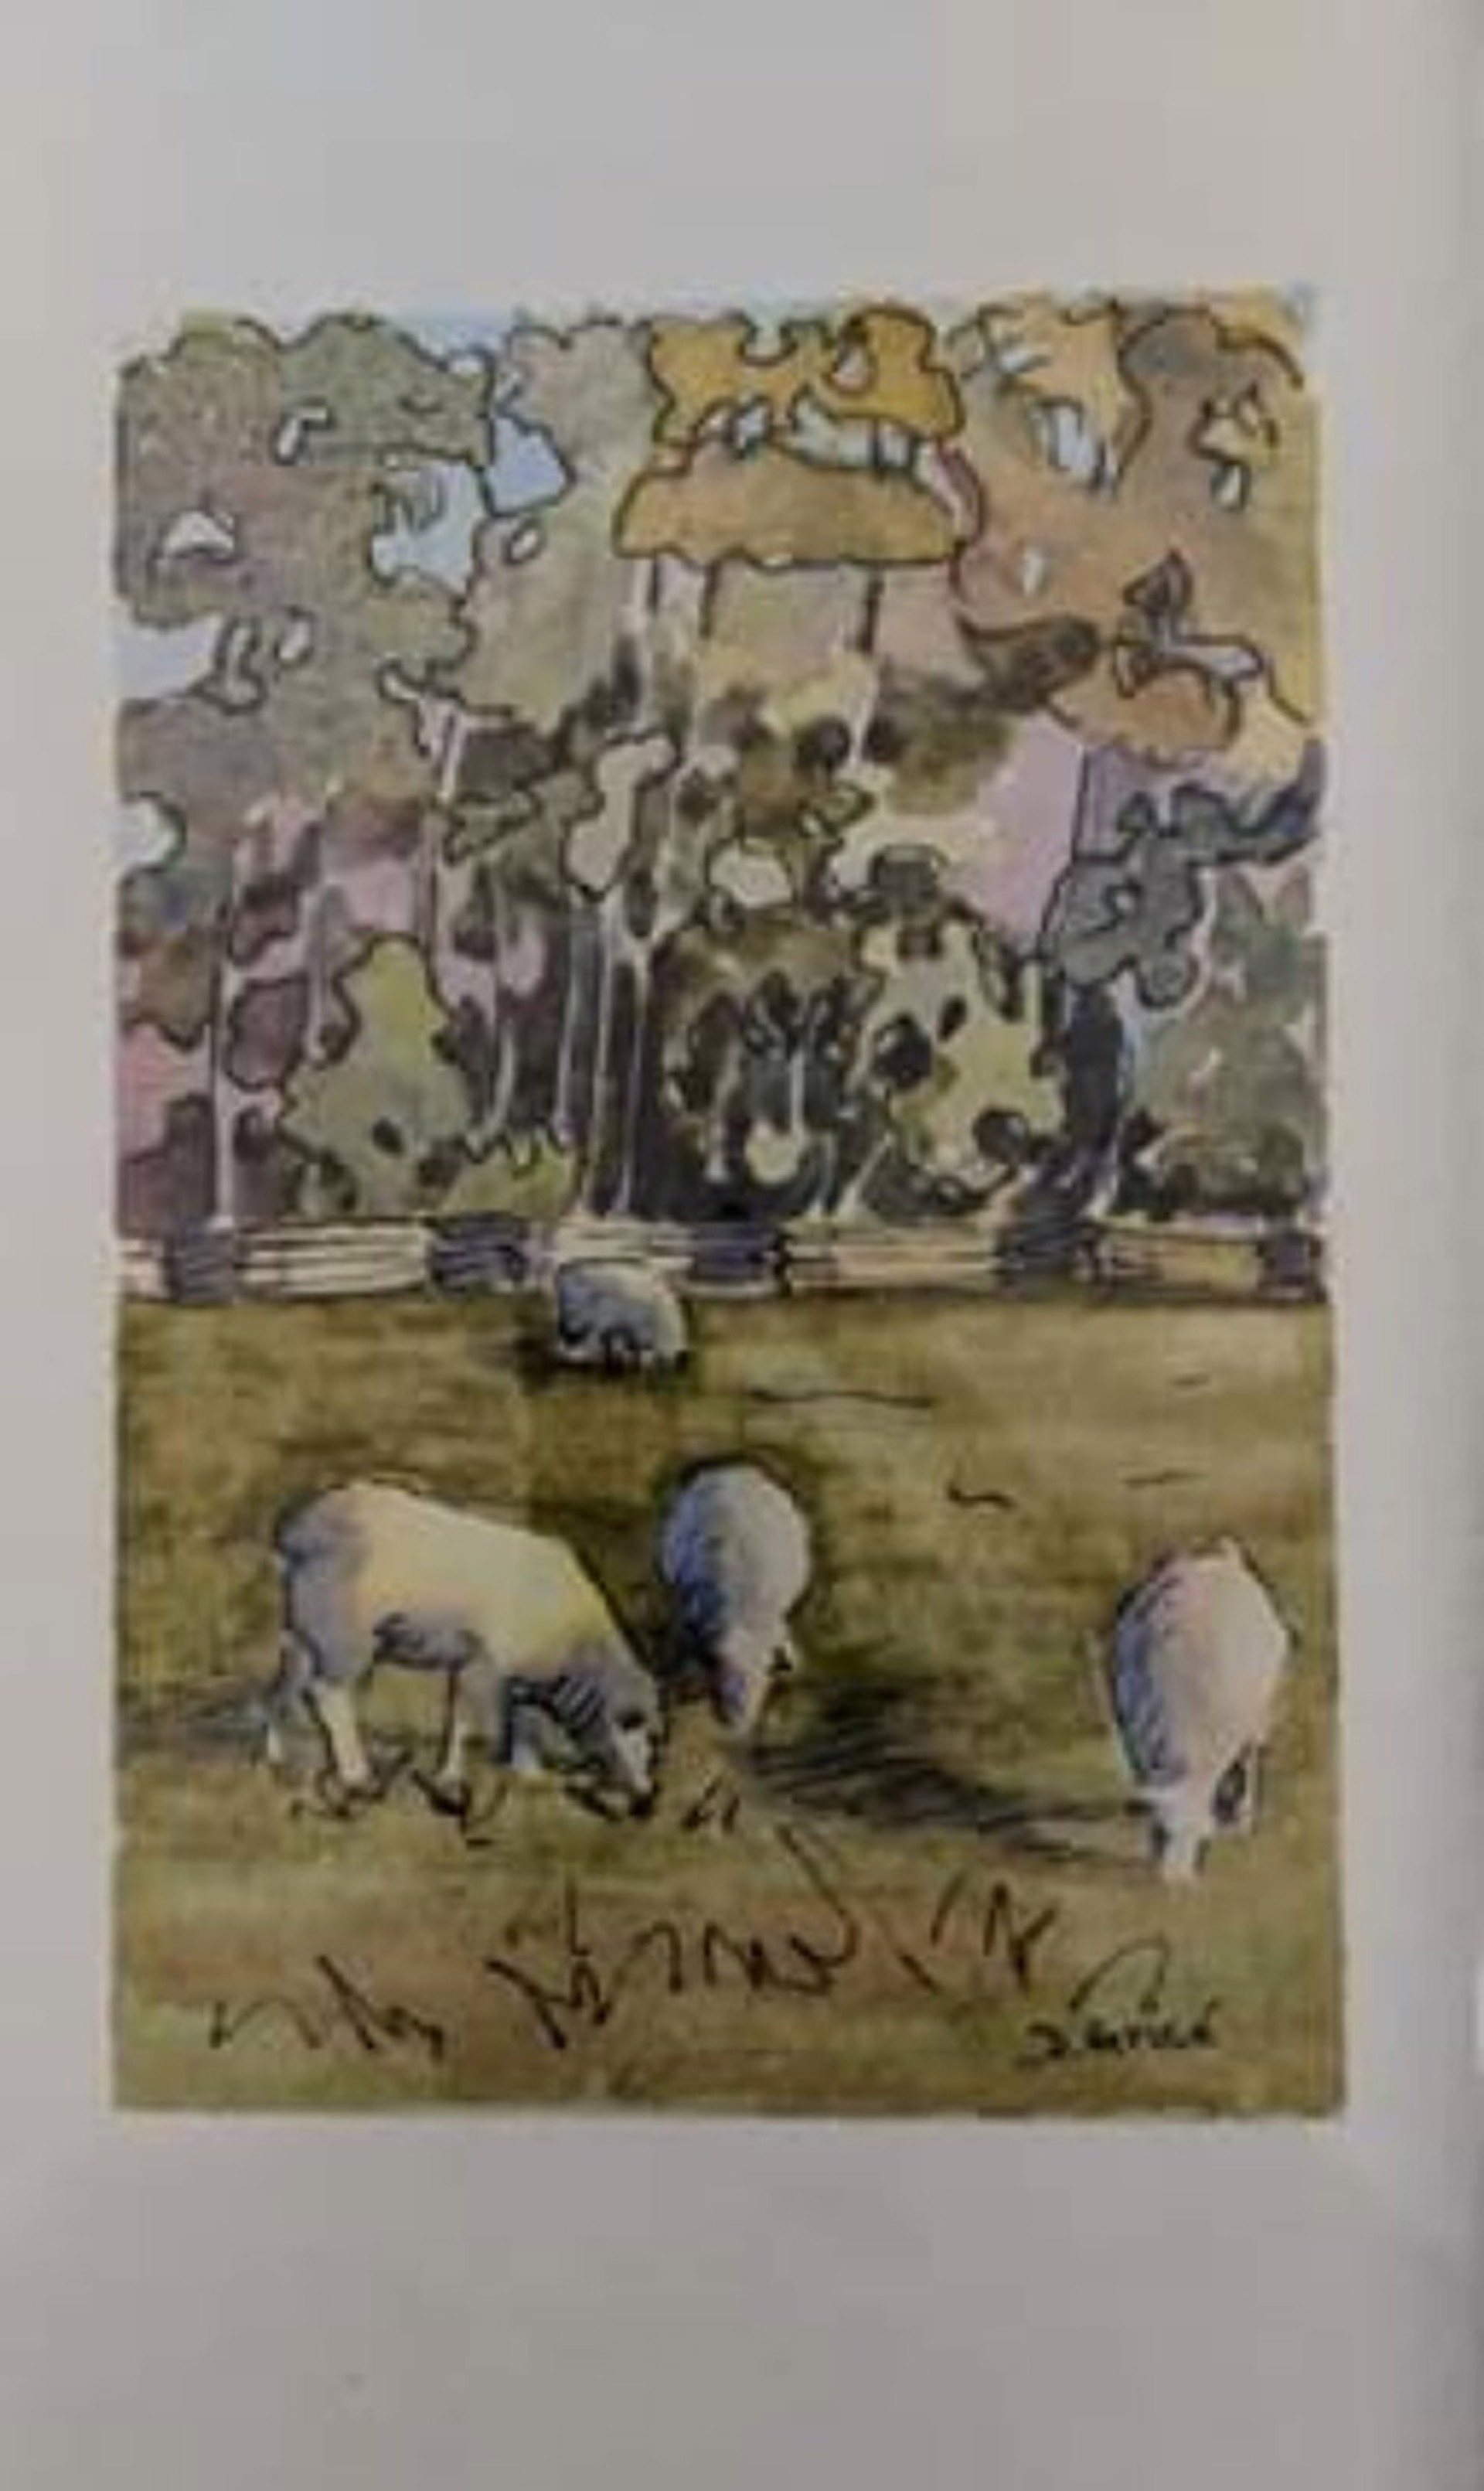 Grazing sheep by Deb Grise